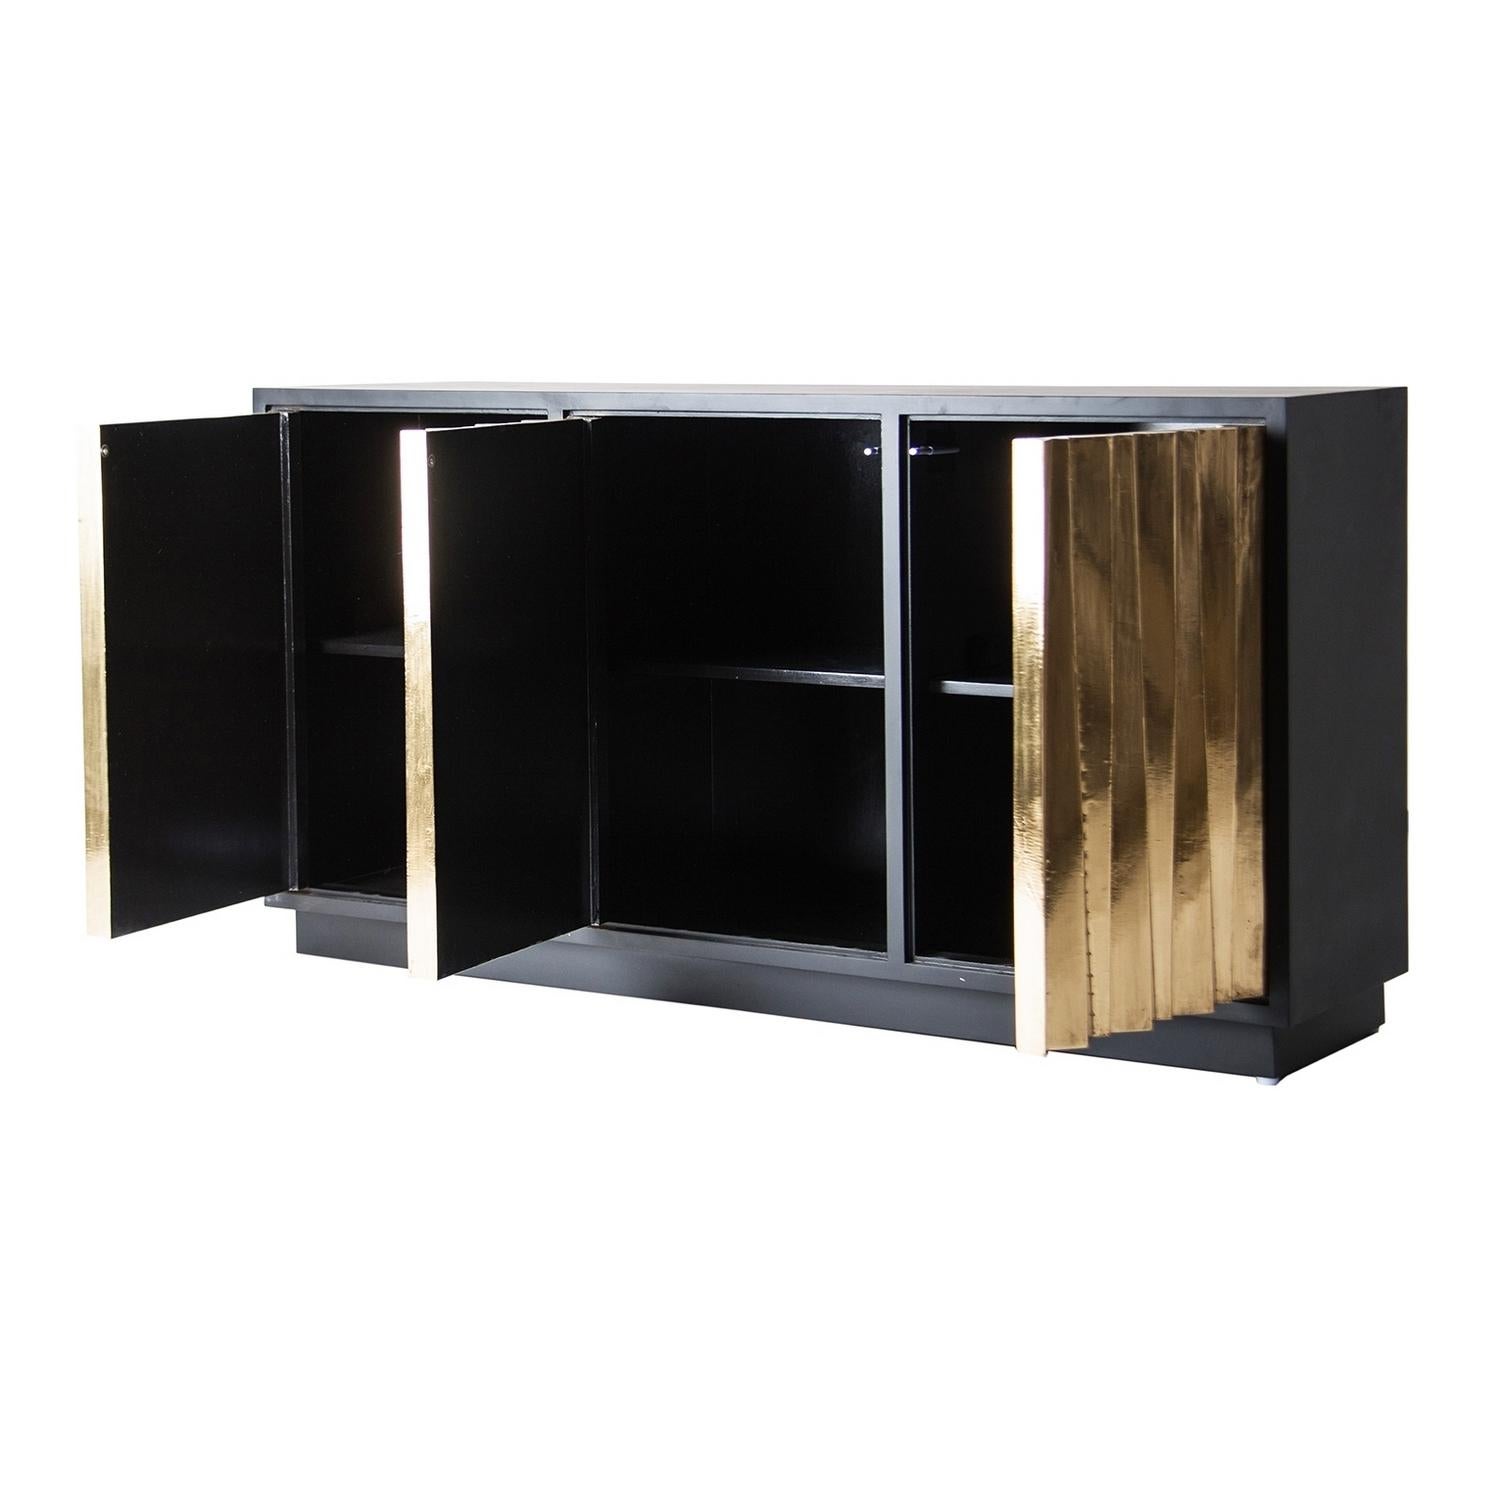 Brutalist style sparkling and sophisticated sideboard with graphic panels doors adorned with brass leaf and opening on shelves.